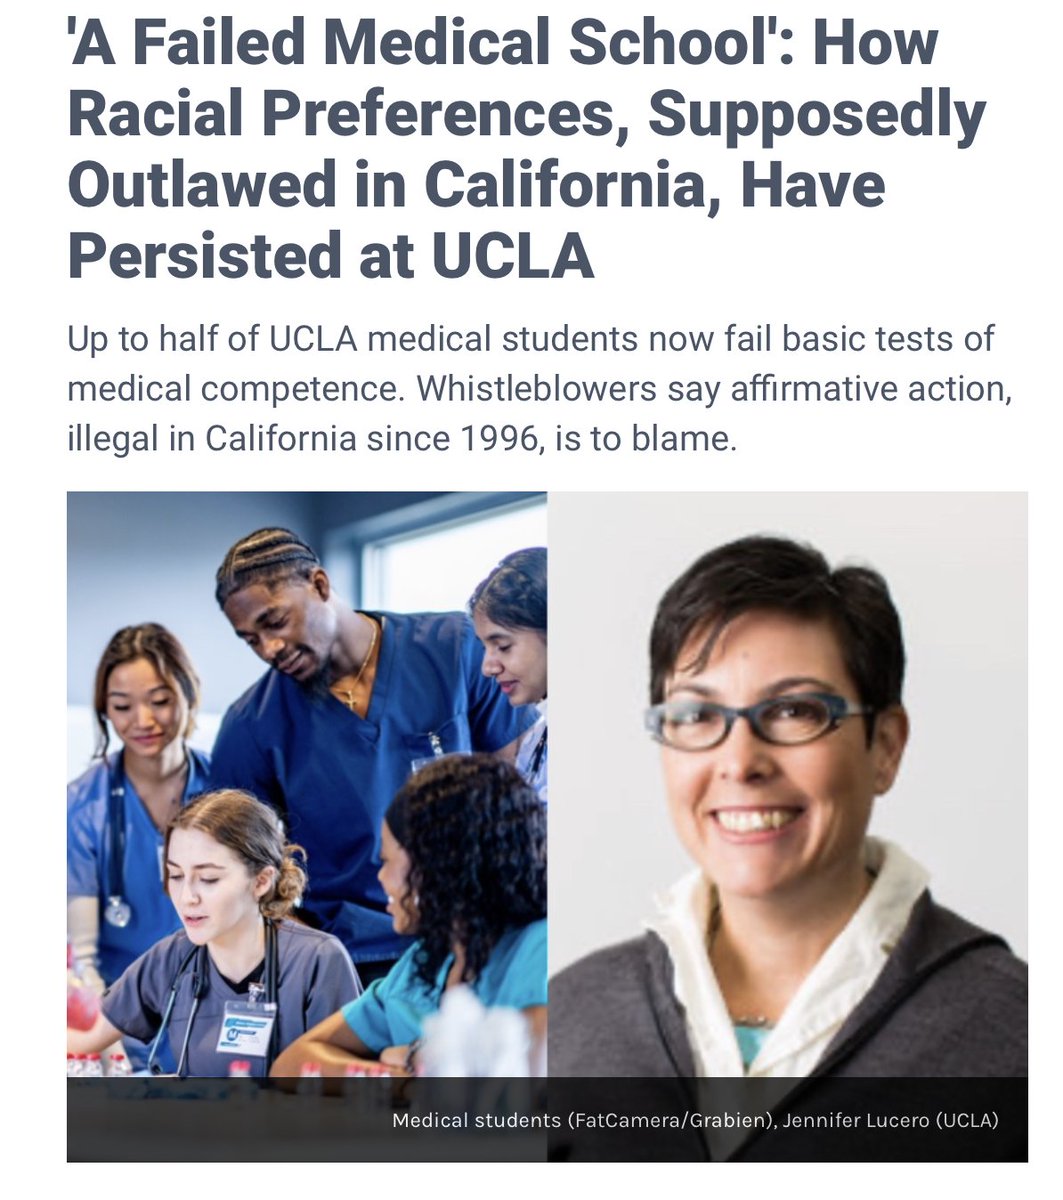 'A Failed Medical School': How Racial Preferences, Supposedly Outlawed in California, Have Persisted at UCLA
Up to half of UCLA medical students now fail basic tests of medical competence. Whistleblowers say affirmative action, illegal in California since 1996, is to blame, by